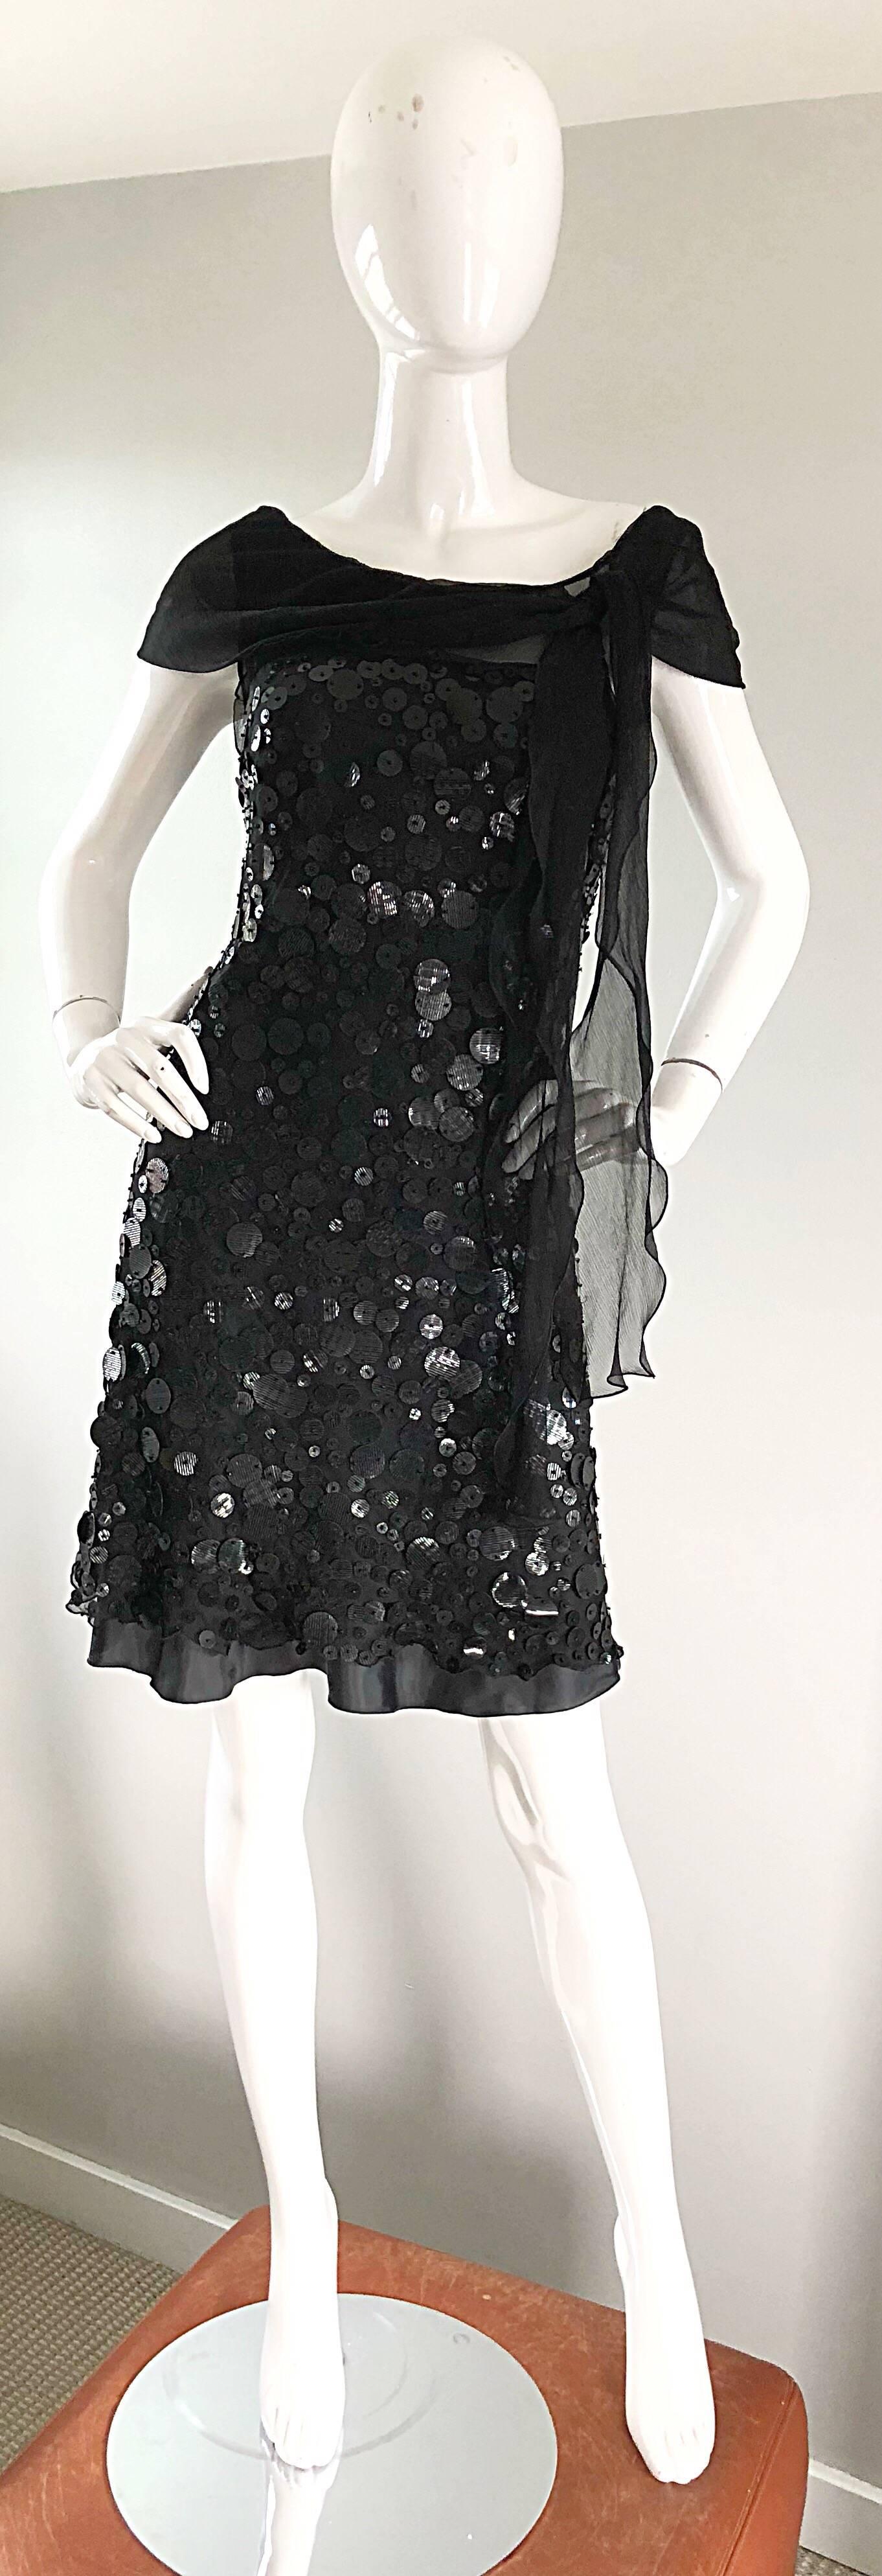 Super stylish never worn late 1990s / 90s MOSCHINO Cheap and Chic black silk chiffon dress! This beauty is embellshed with thousands of hand-sewn black iridescent paillettes in a variety of sizes throughout. Fitted bodice, with a forgiving flirty